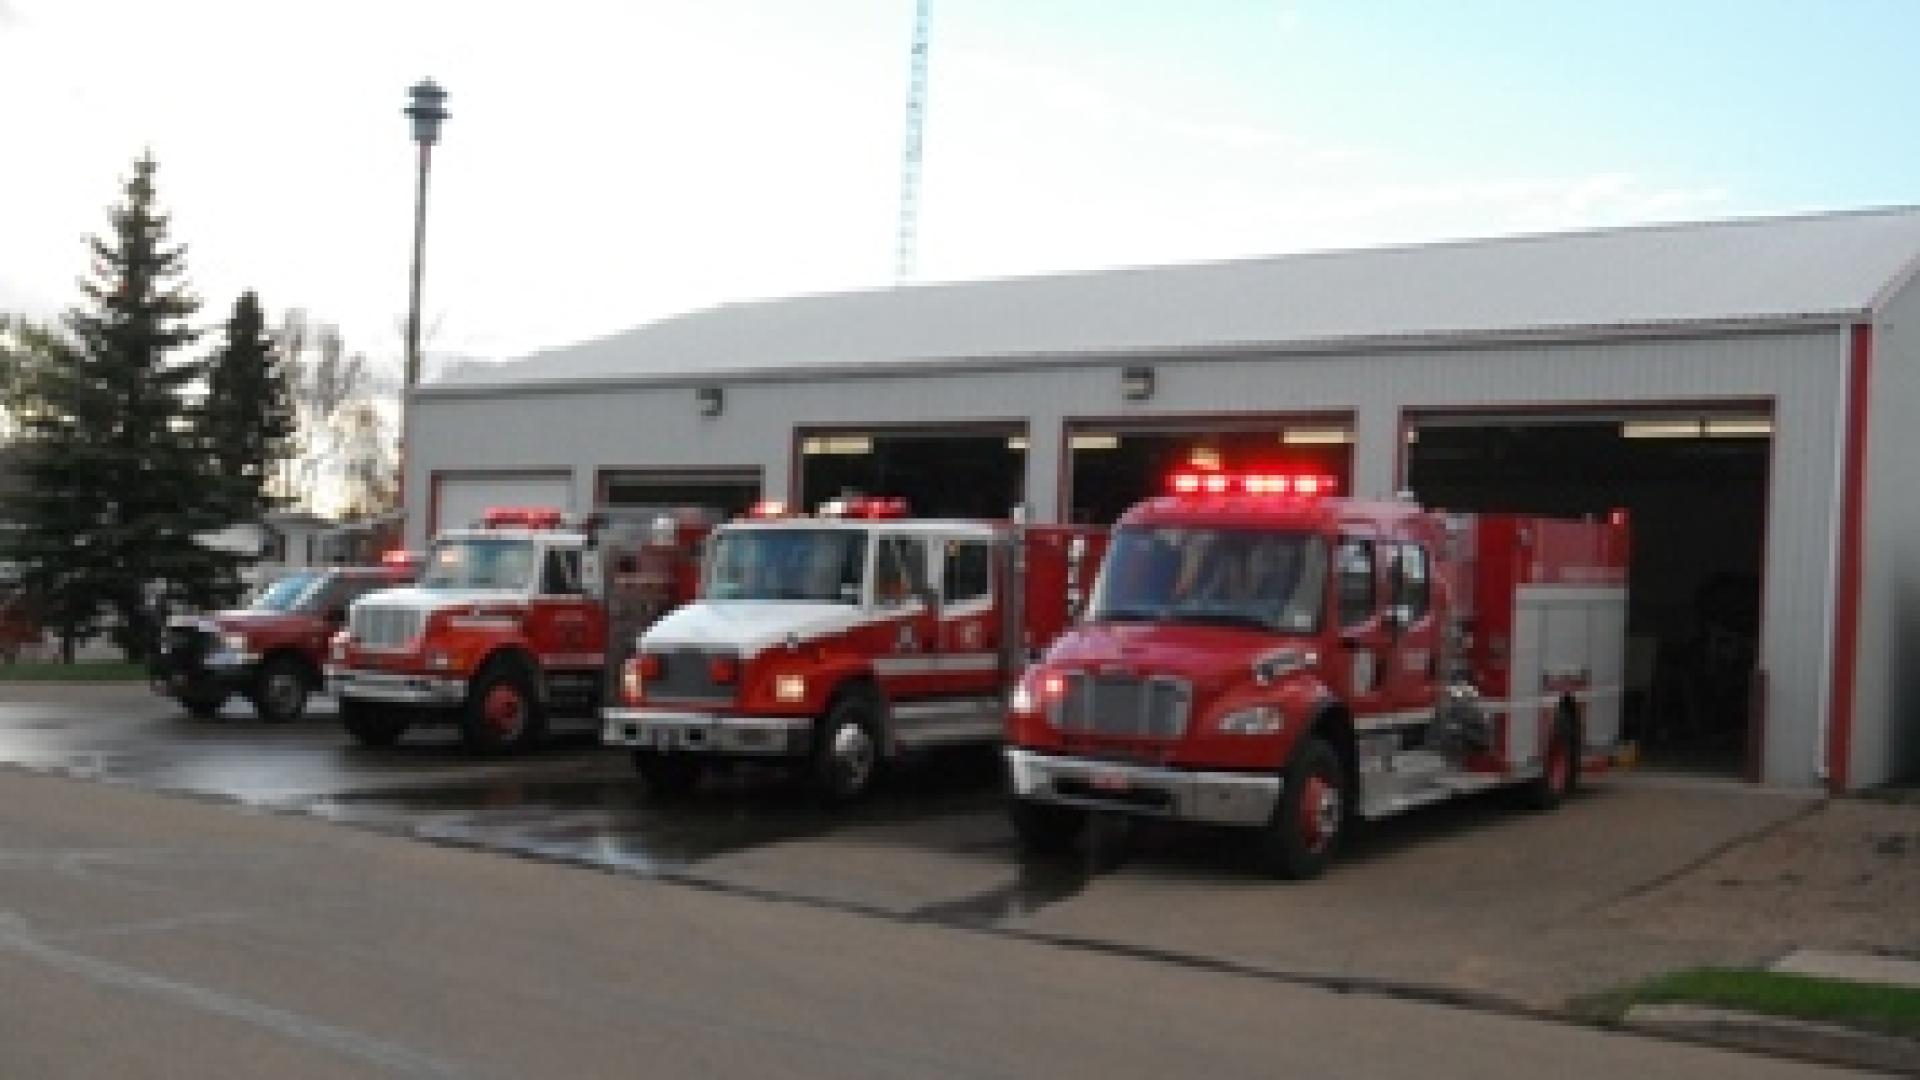 Killam Fire Department fire fleet outside of fire station. There are 3 red and white fire trucks in the fleet